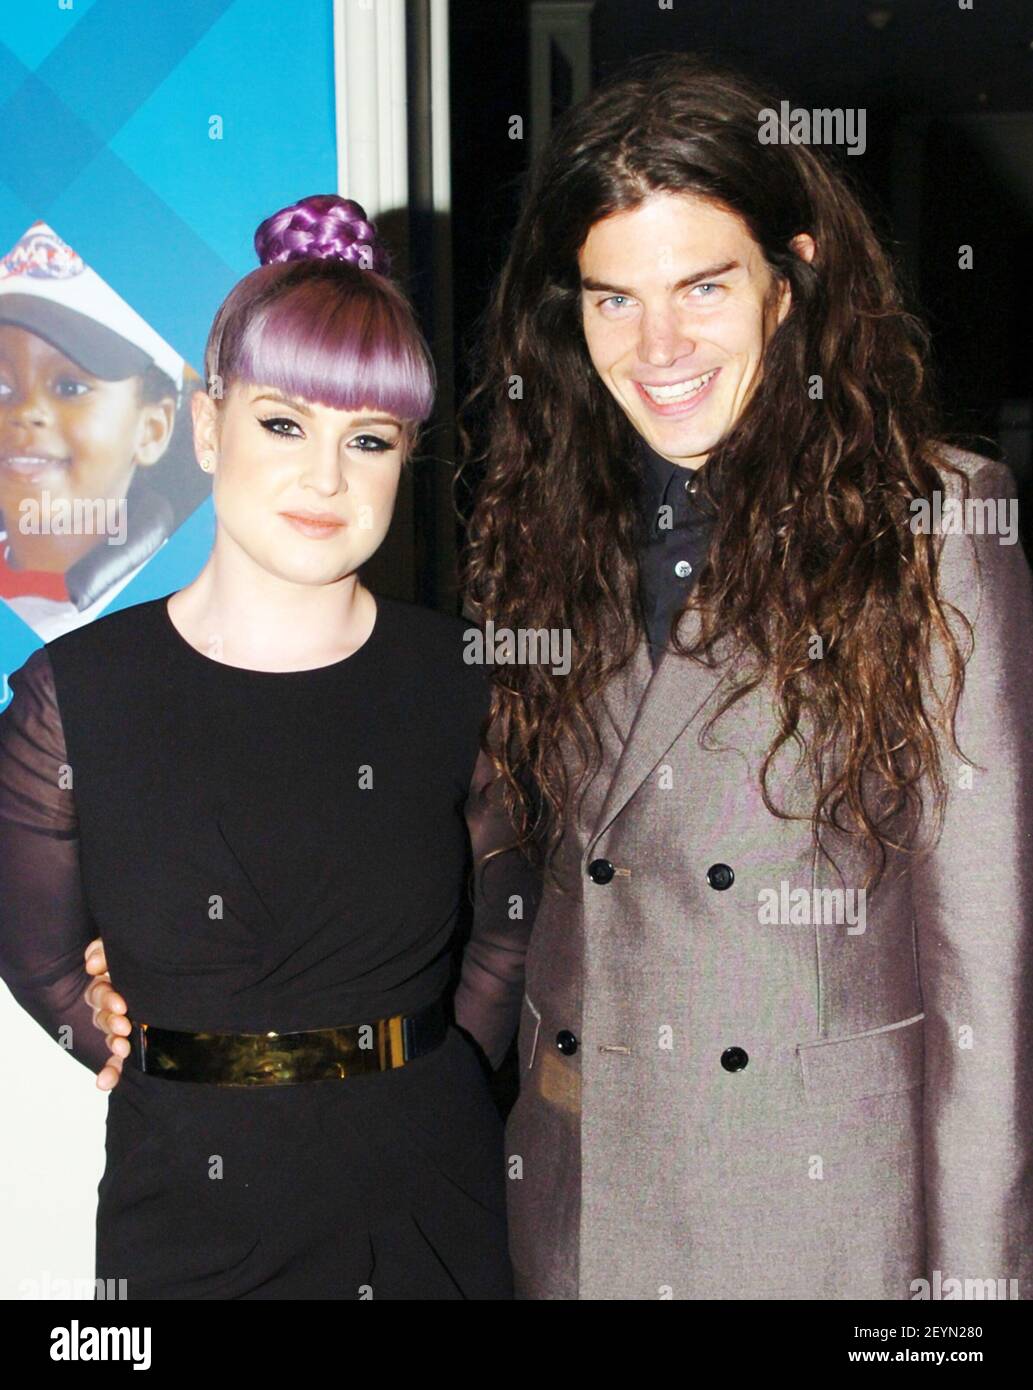 BEVERLY HILLS, CA - DECEMBER 04: Kelly Osbourne and Matthew Mosshart attend the Make-A-Wish Foundation of Greater Los Angeles 2013 Wishing Well Winter Gala at Regent Beverly Wilshire Hotel on December 4, 2013 in Beverly Hills, California. (Photo by Milla Cochran/Sipa USA) Stock Photo